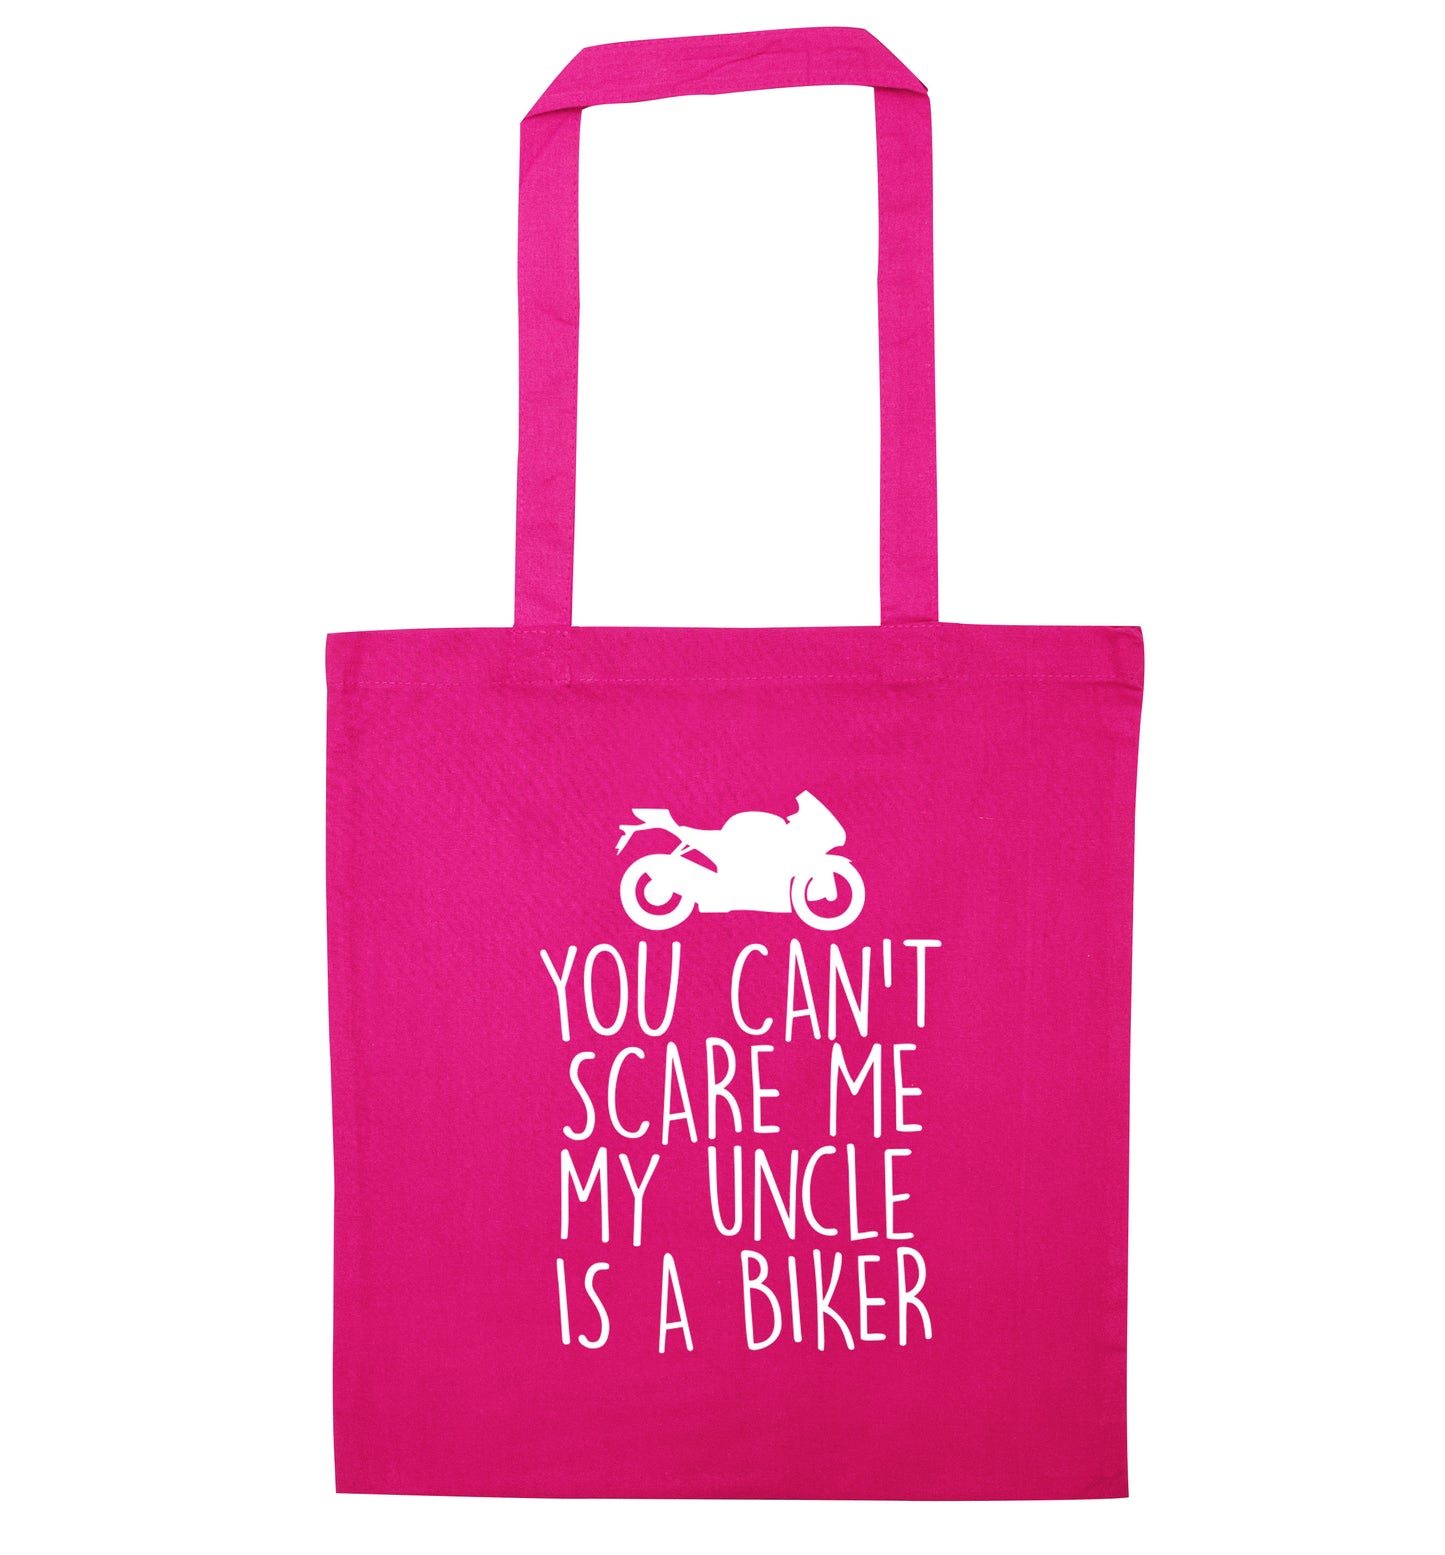 You can't scare me my uncle is a biker pink tote bag